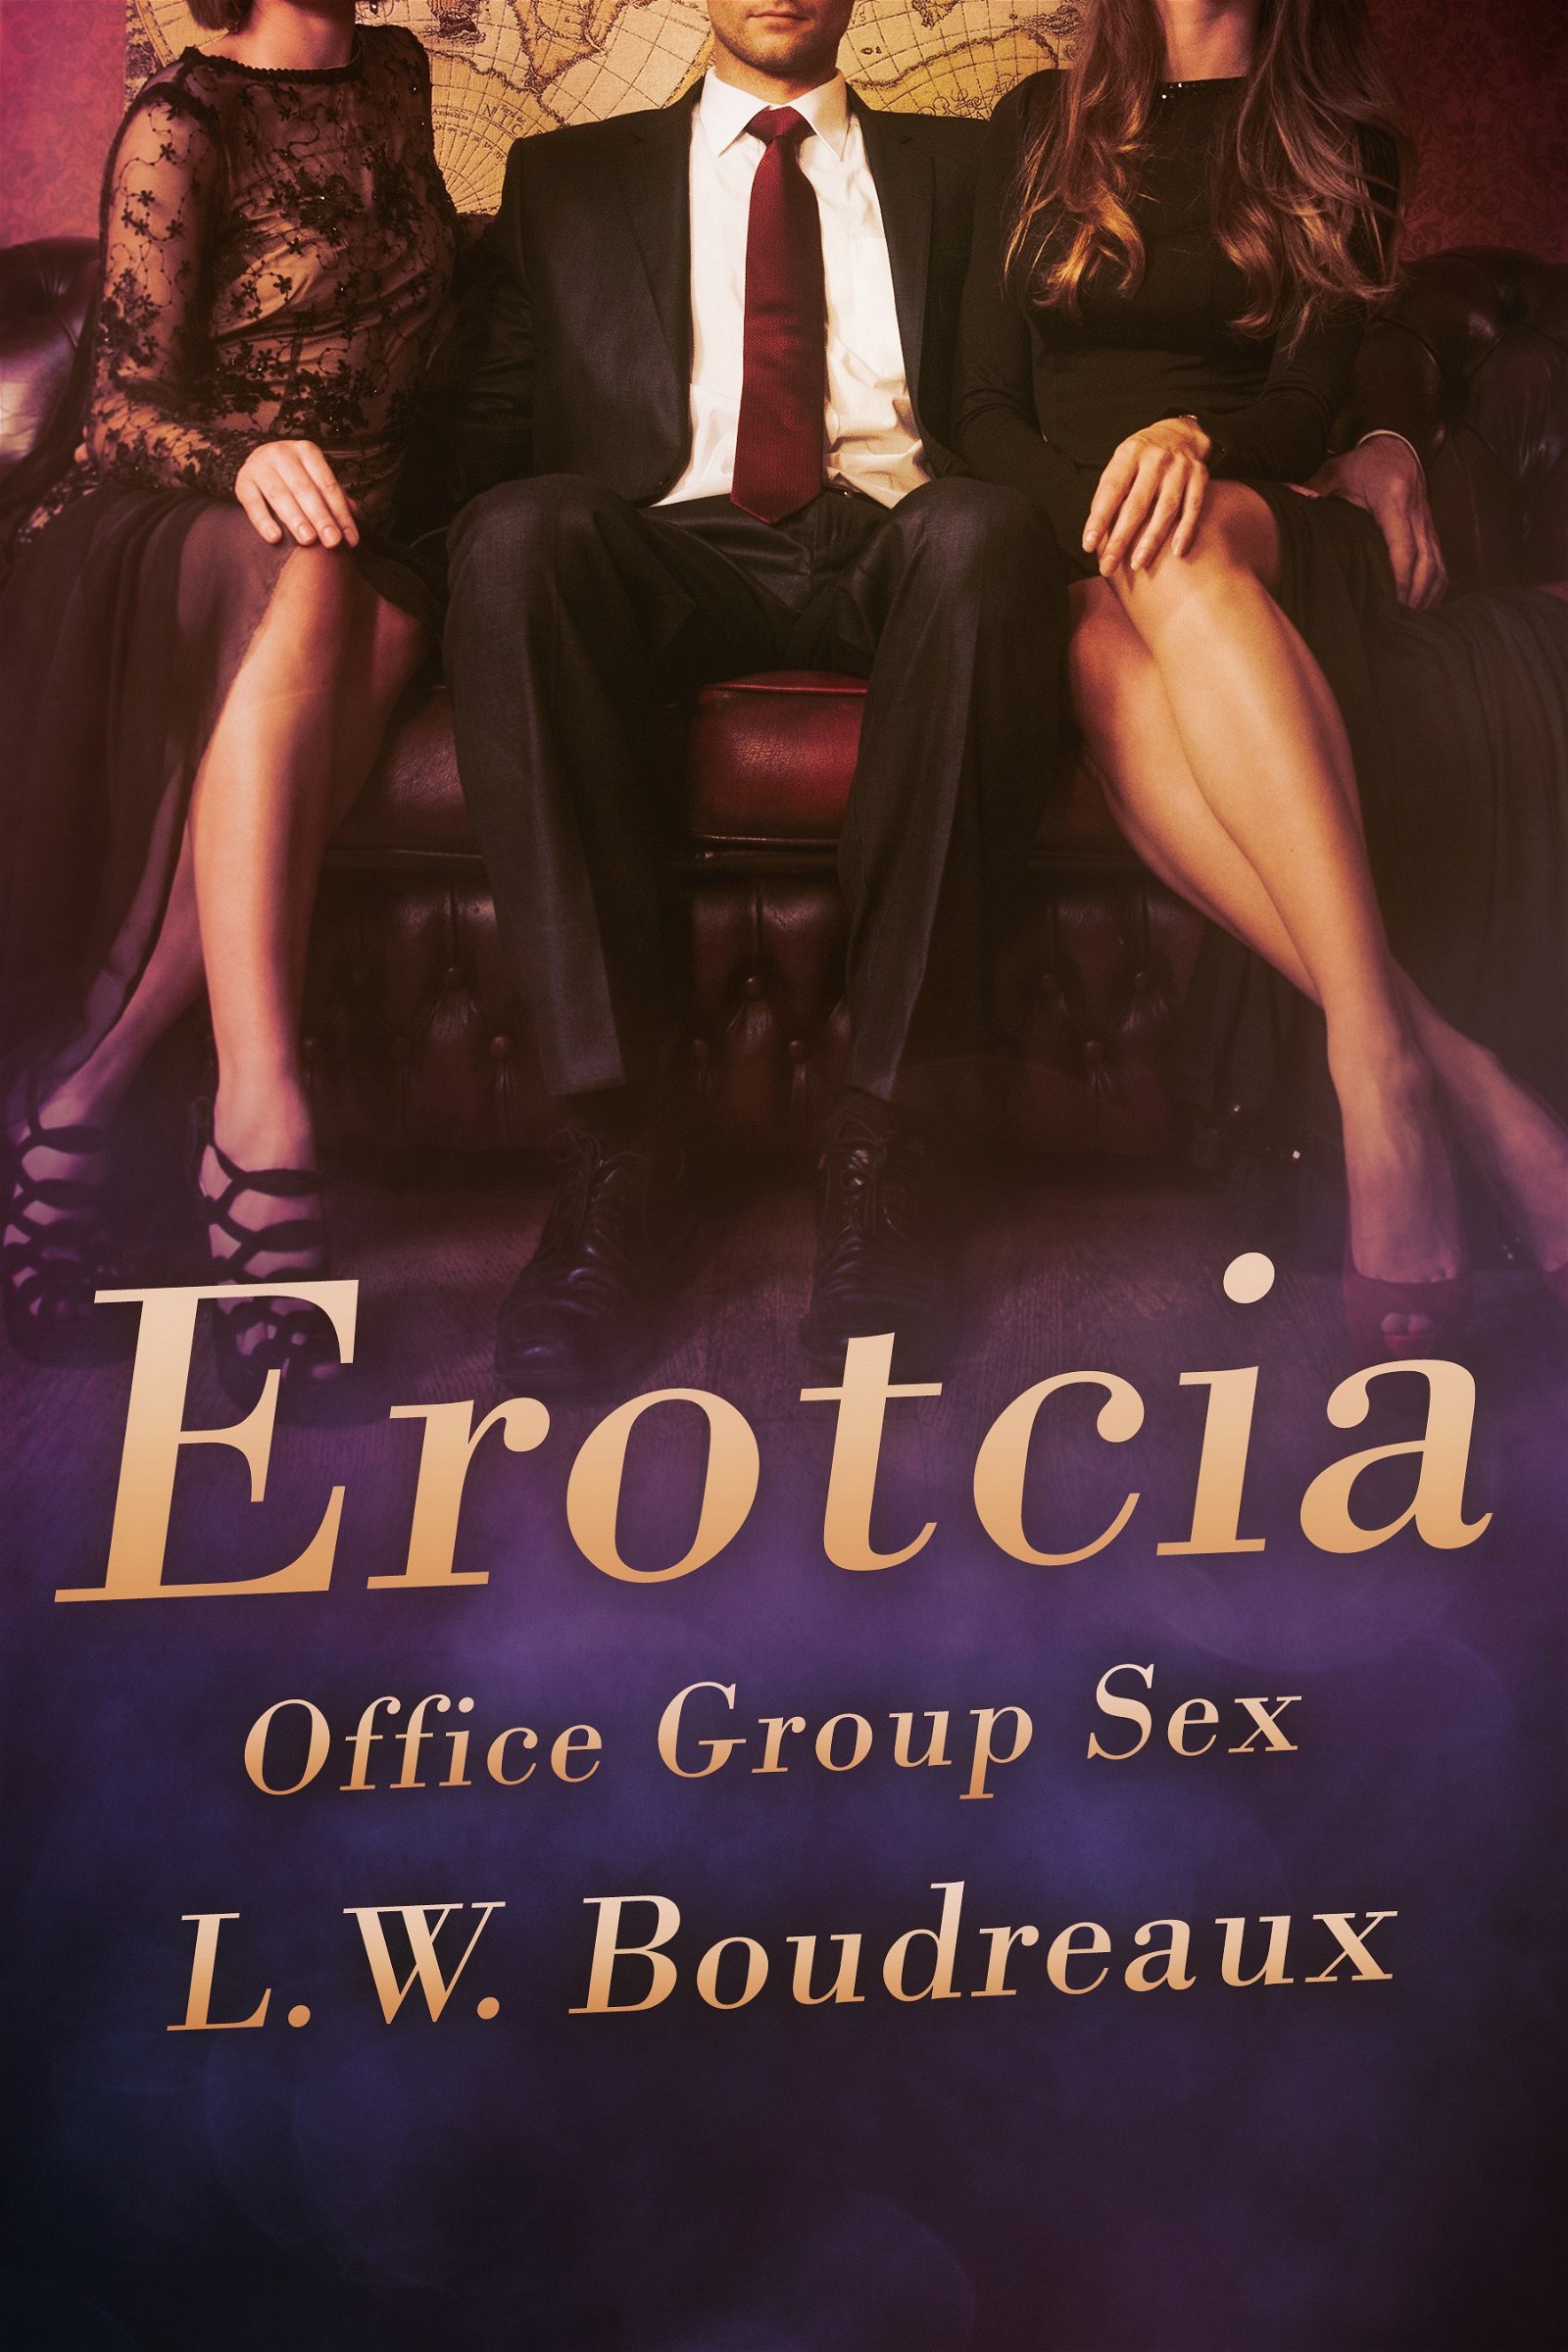 Photo by erotcia with the username @erotcia, who is a verified user,  May 18, 2020 at 10:02 AM. The post is about the topic Erotcia: Erotica books by LW Boudreaux and the text says 'SHARE IF YOU THINK OFFICE SEX SHOULD BE PART OF THE JOB

Erotcia Office Group Sex

Jerome thinks he's at the office just to clean up the mess. Little does he know, some of the women like to stay late, and they're dirty. VERY DIRTY!!

FREE sample @..'